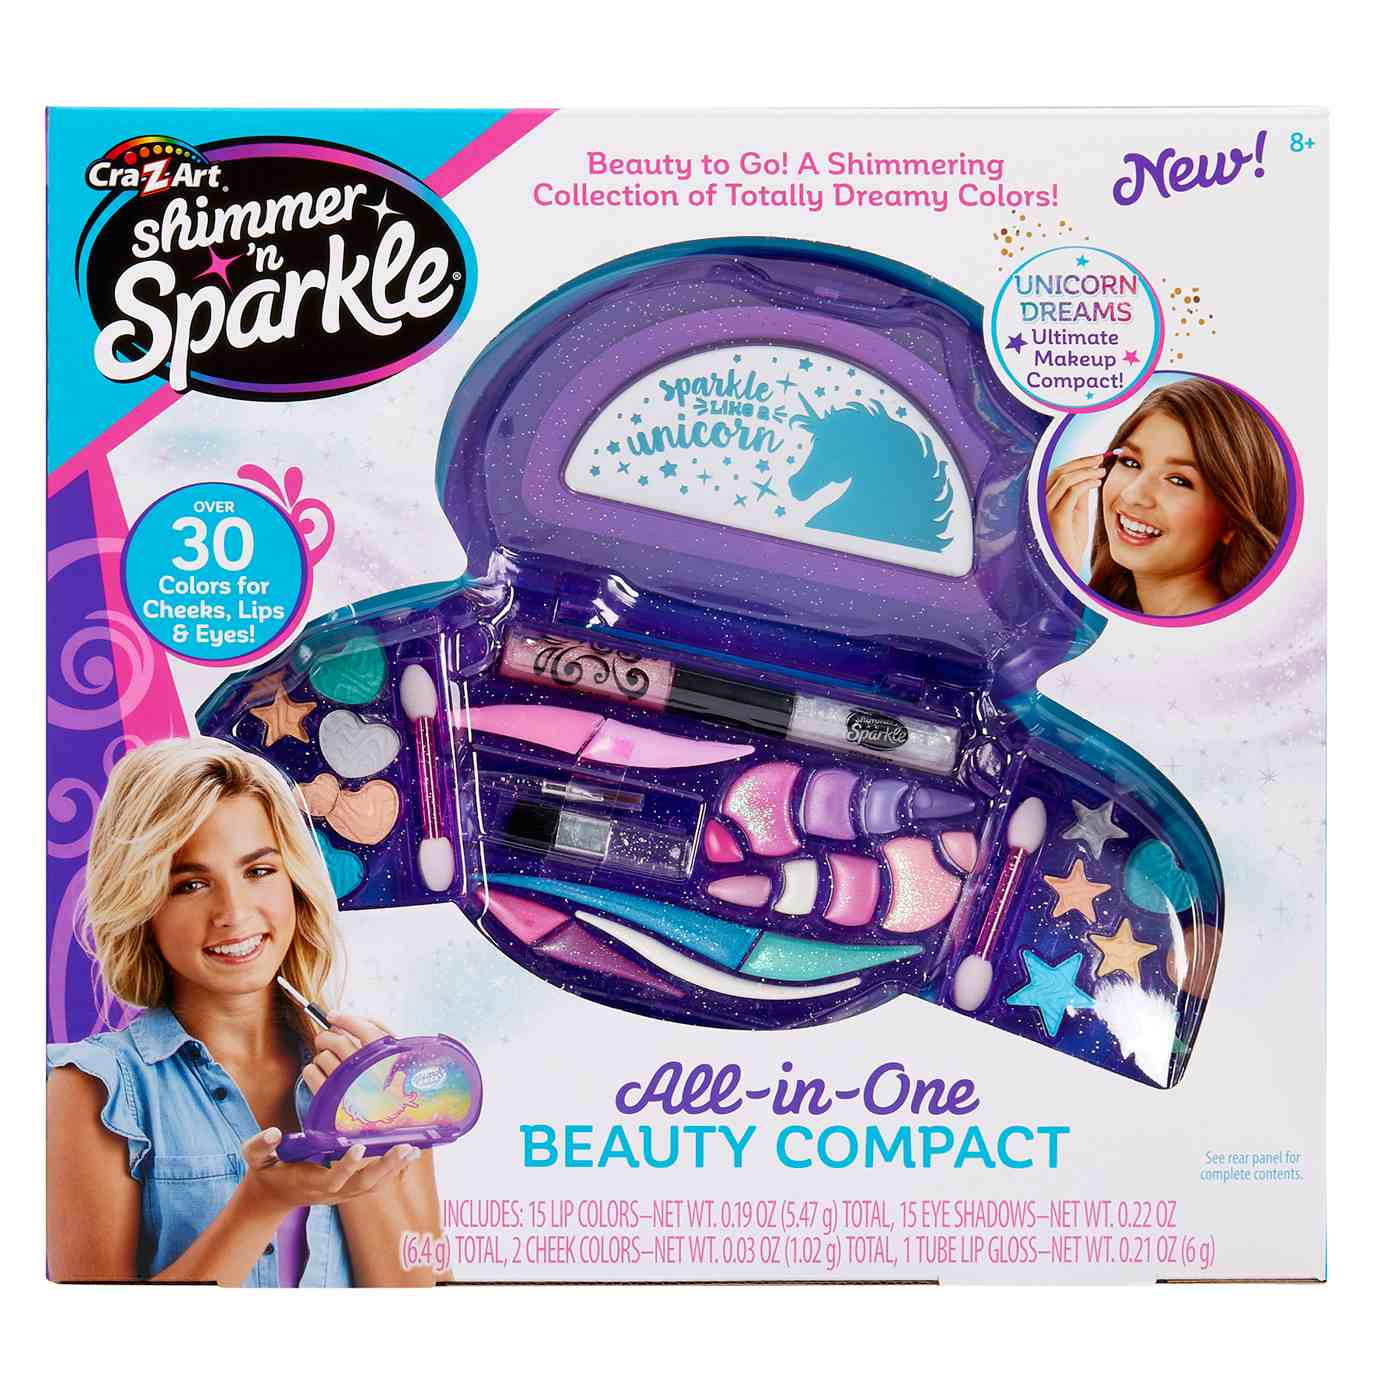 Cra-Z-Art Shimmer 'N Sparkle All-In-One Beauty Compact; image 1 of 4